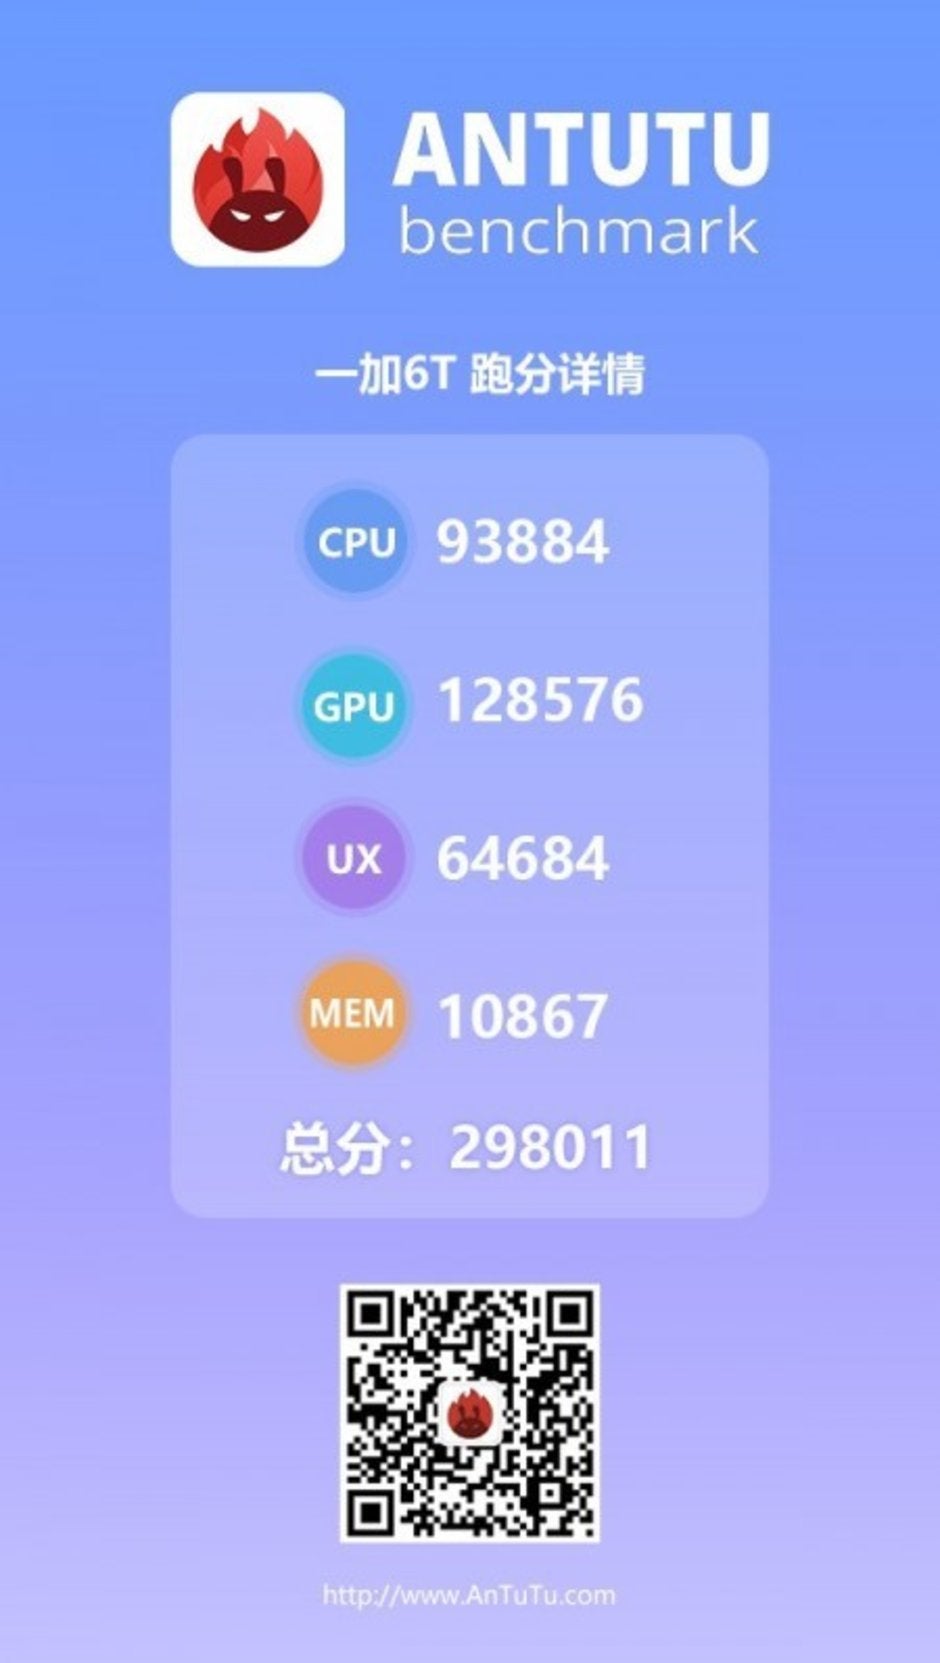 The OnePlus 6T benchmark score bested by only one 'gaming' Android phone, says AnTuTu